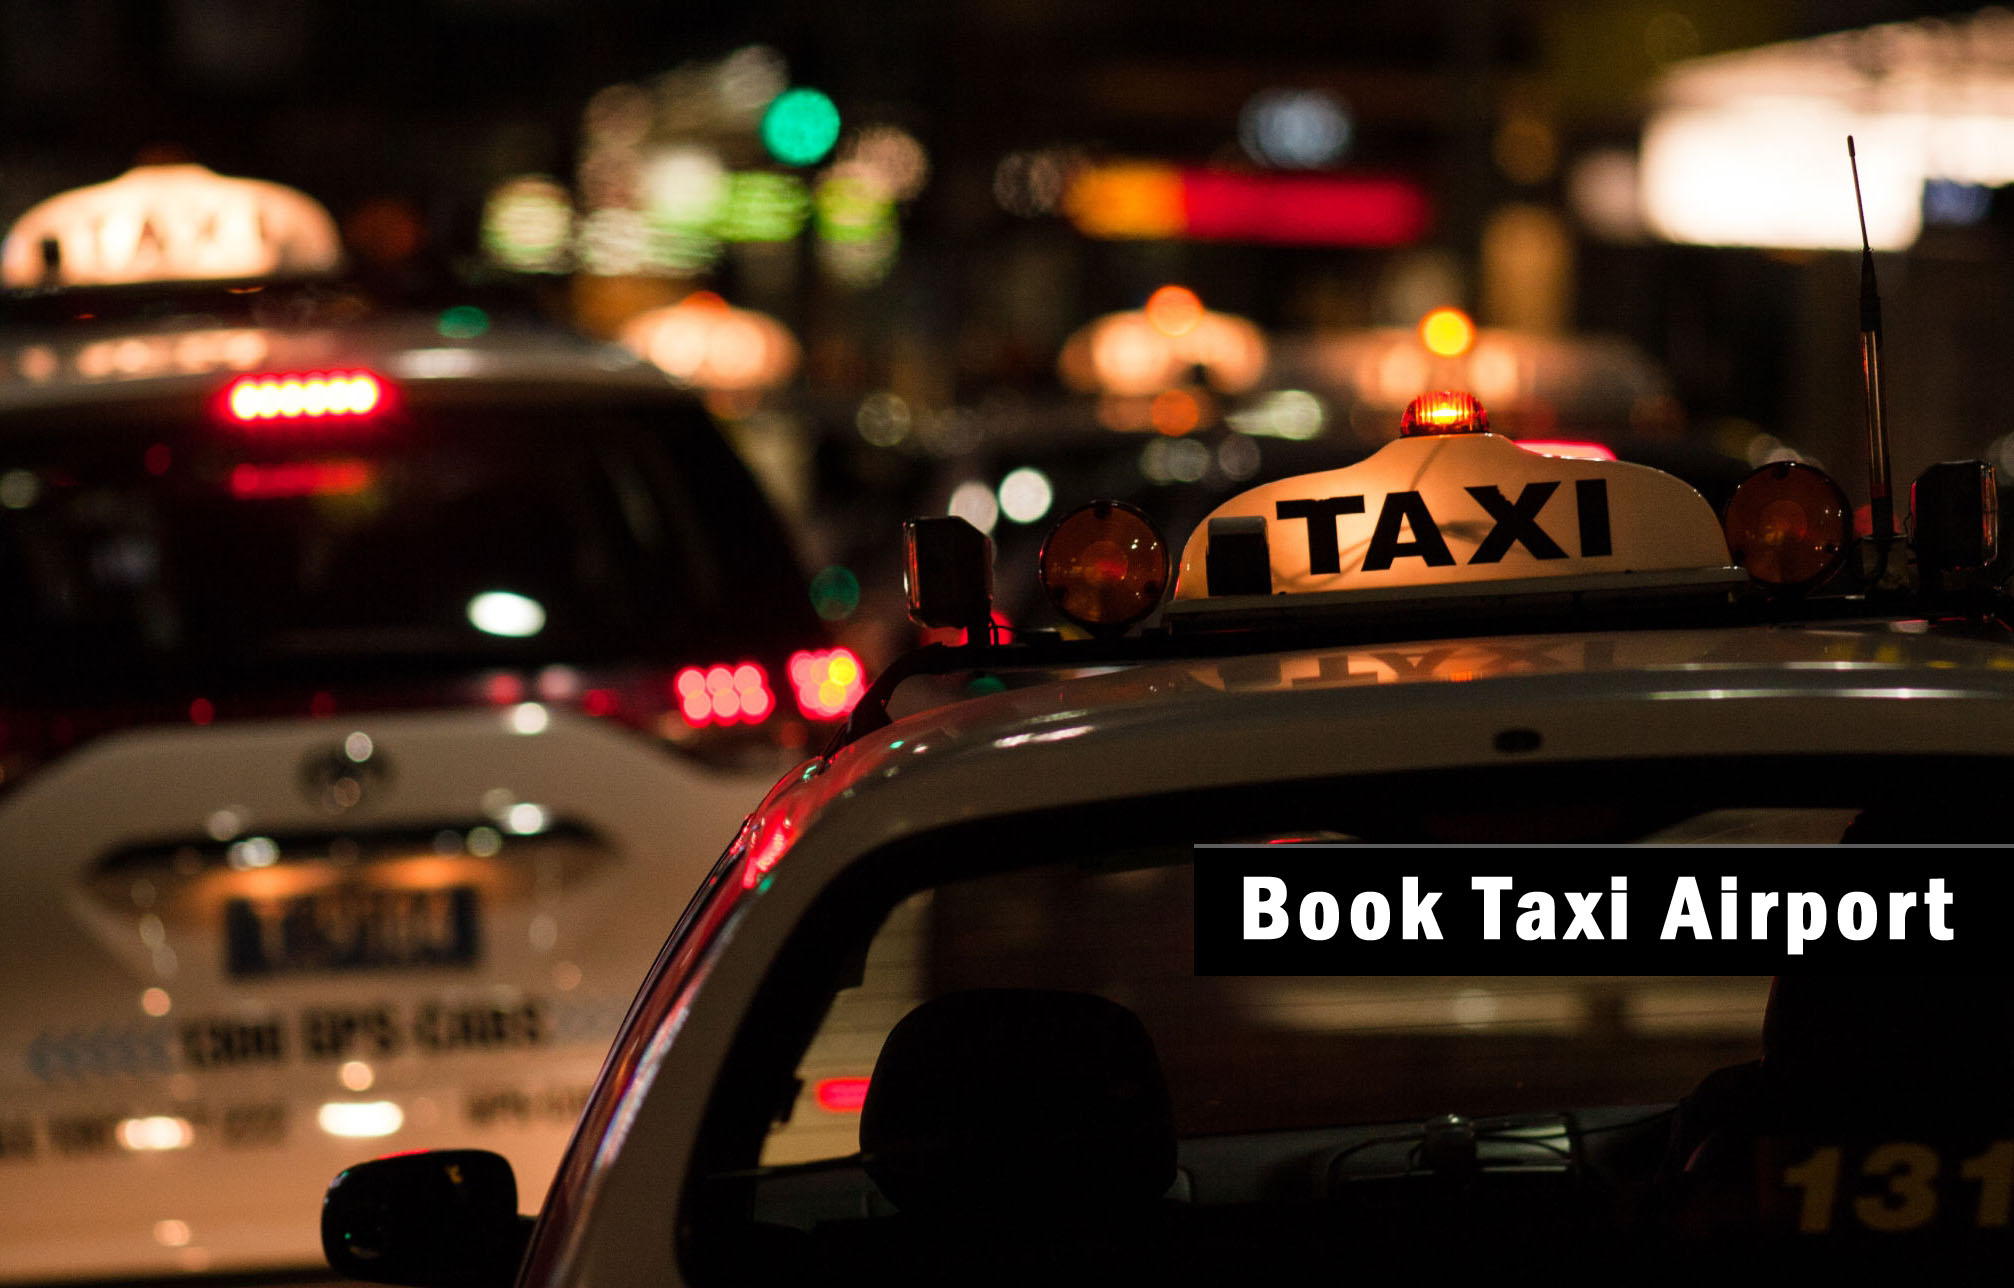 Book Taxi Aiprort